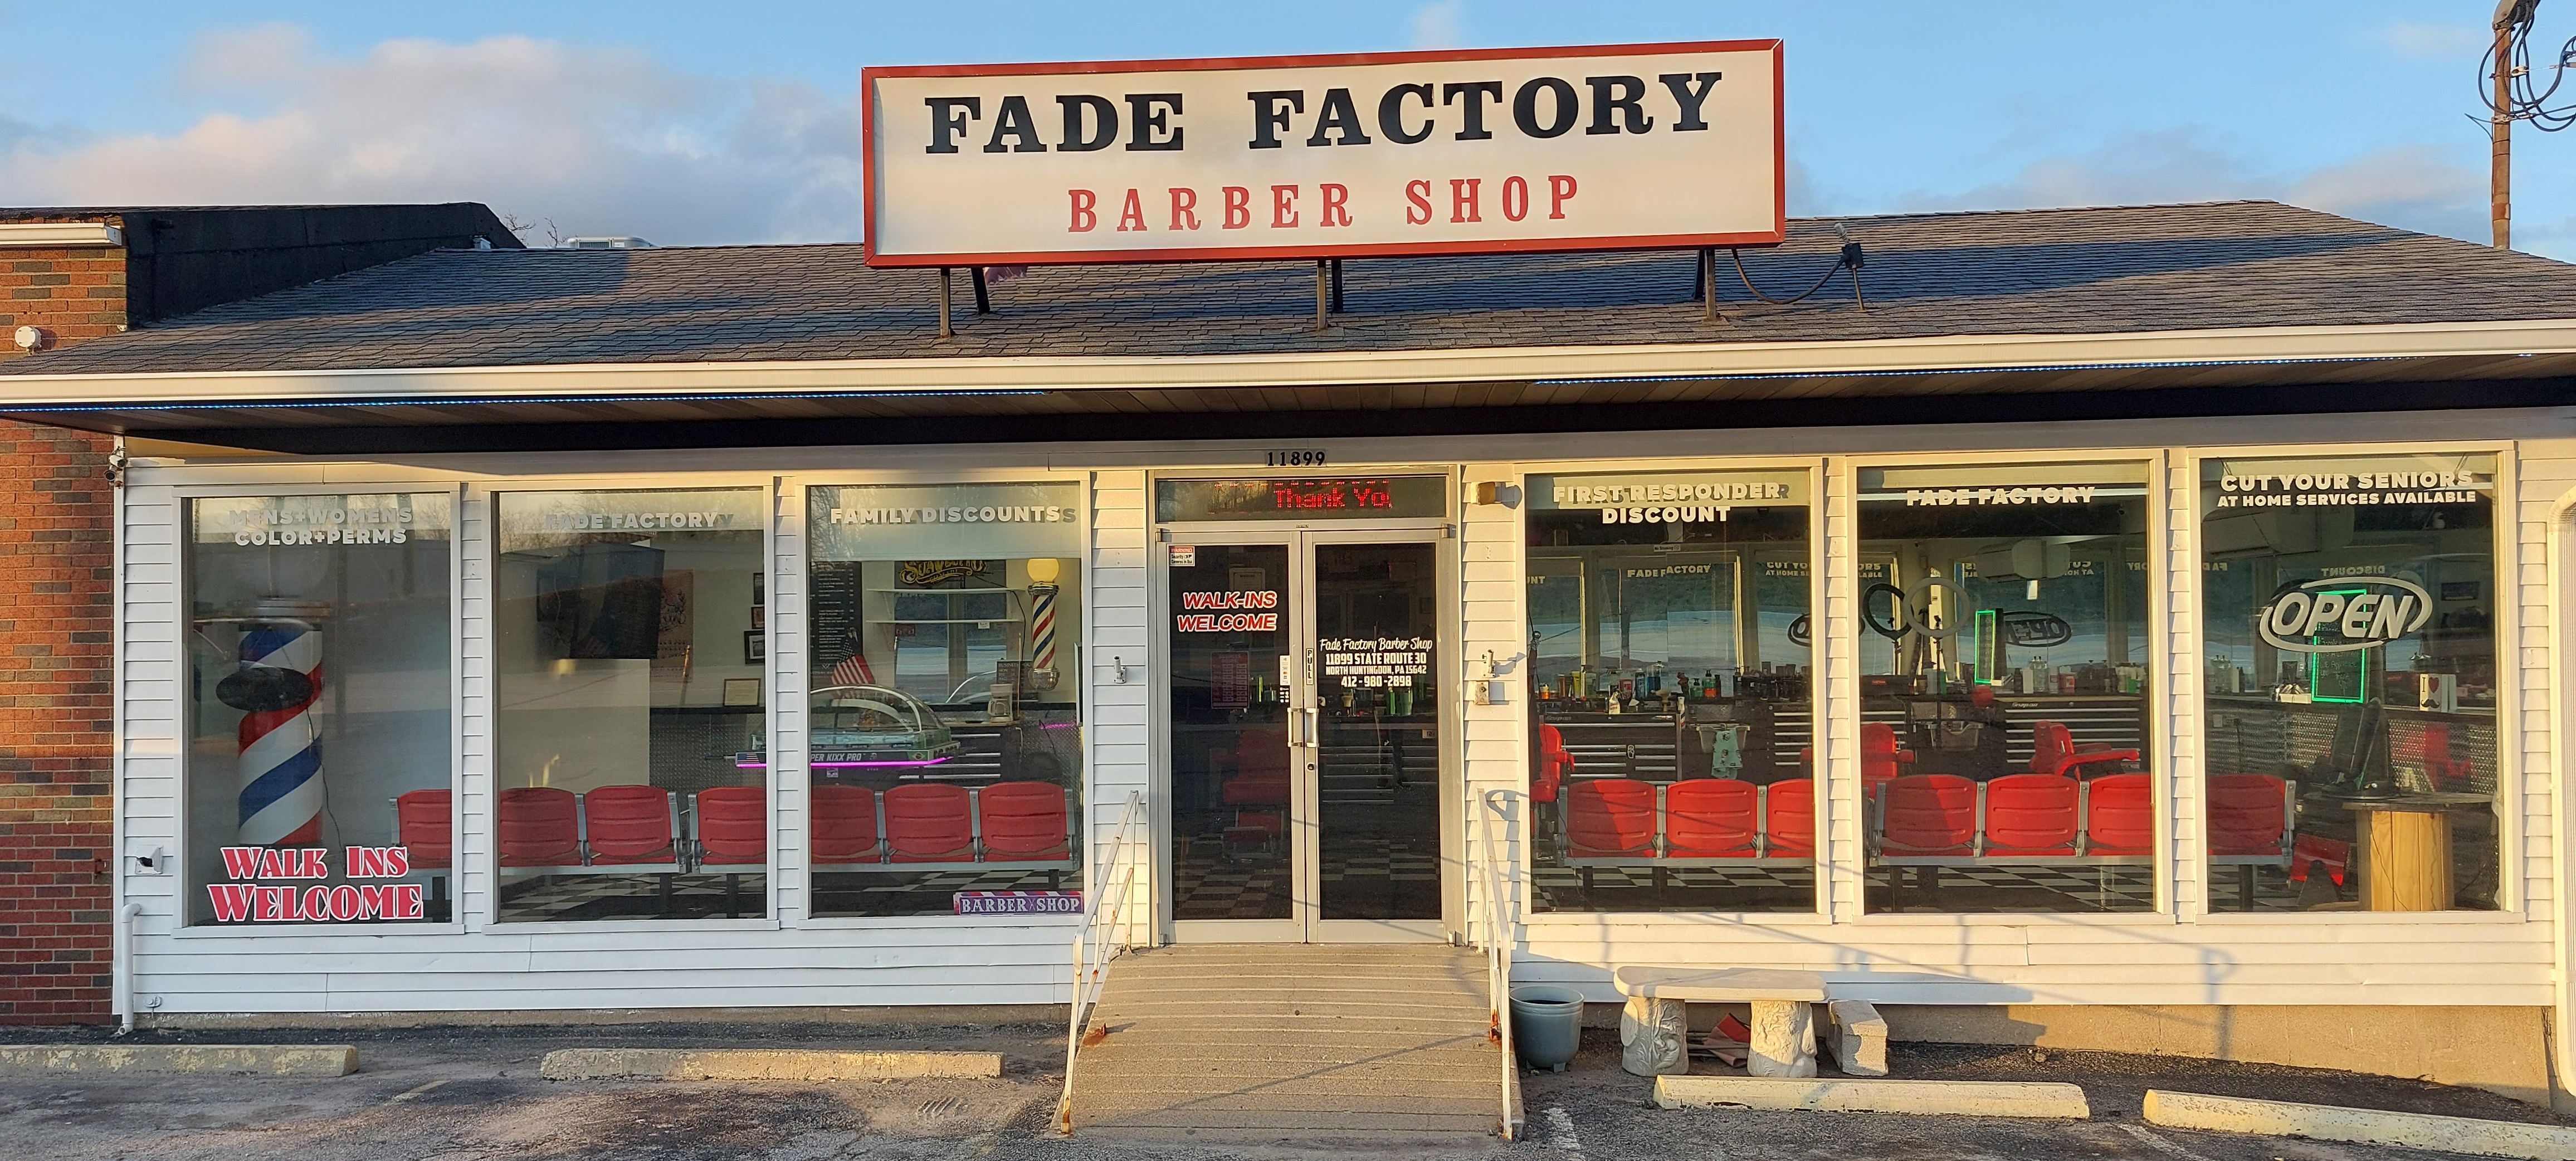 The fade factory barbershop, 11899 State Route 30, Irwin, 15642